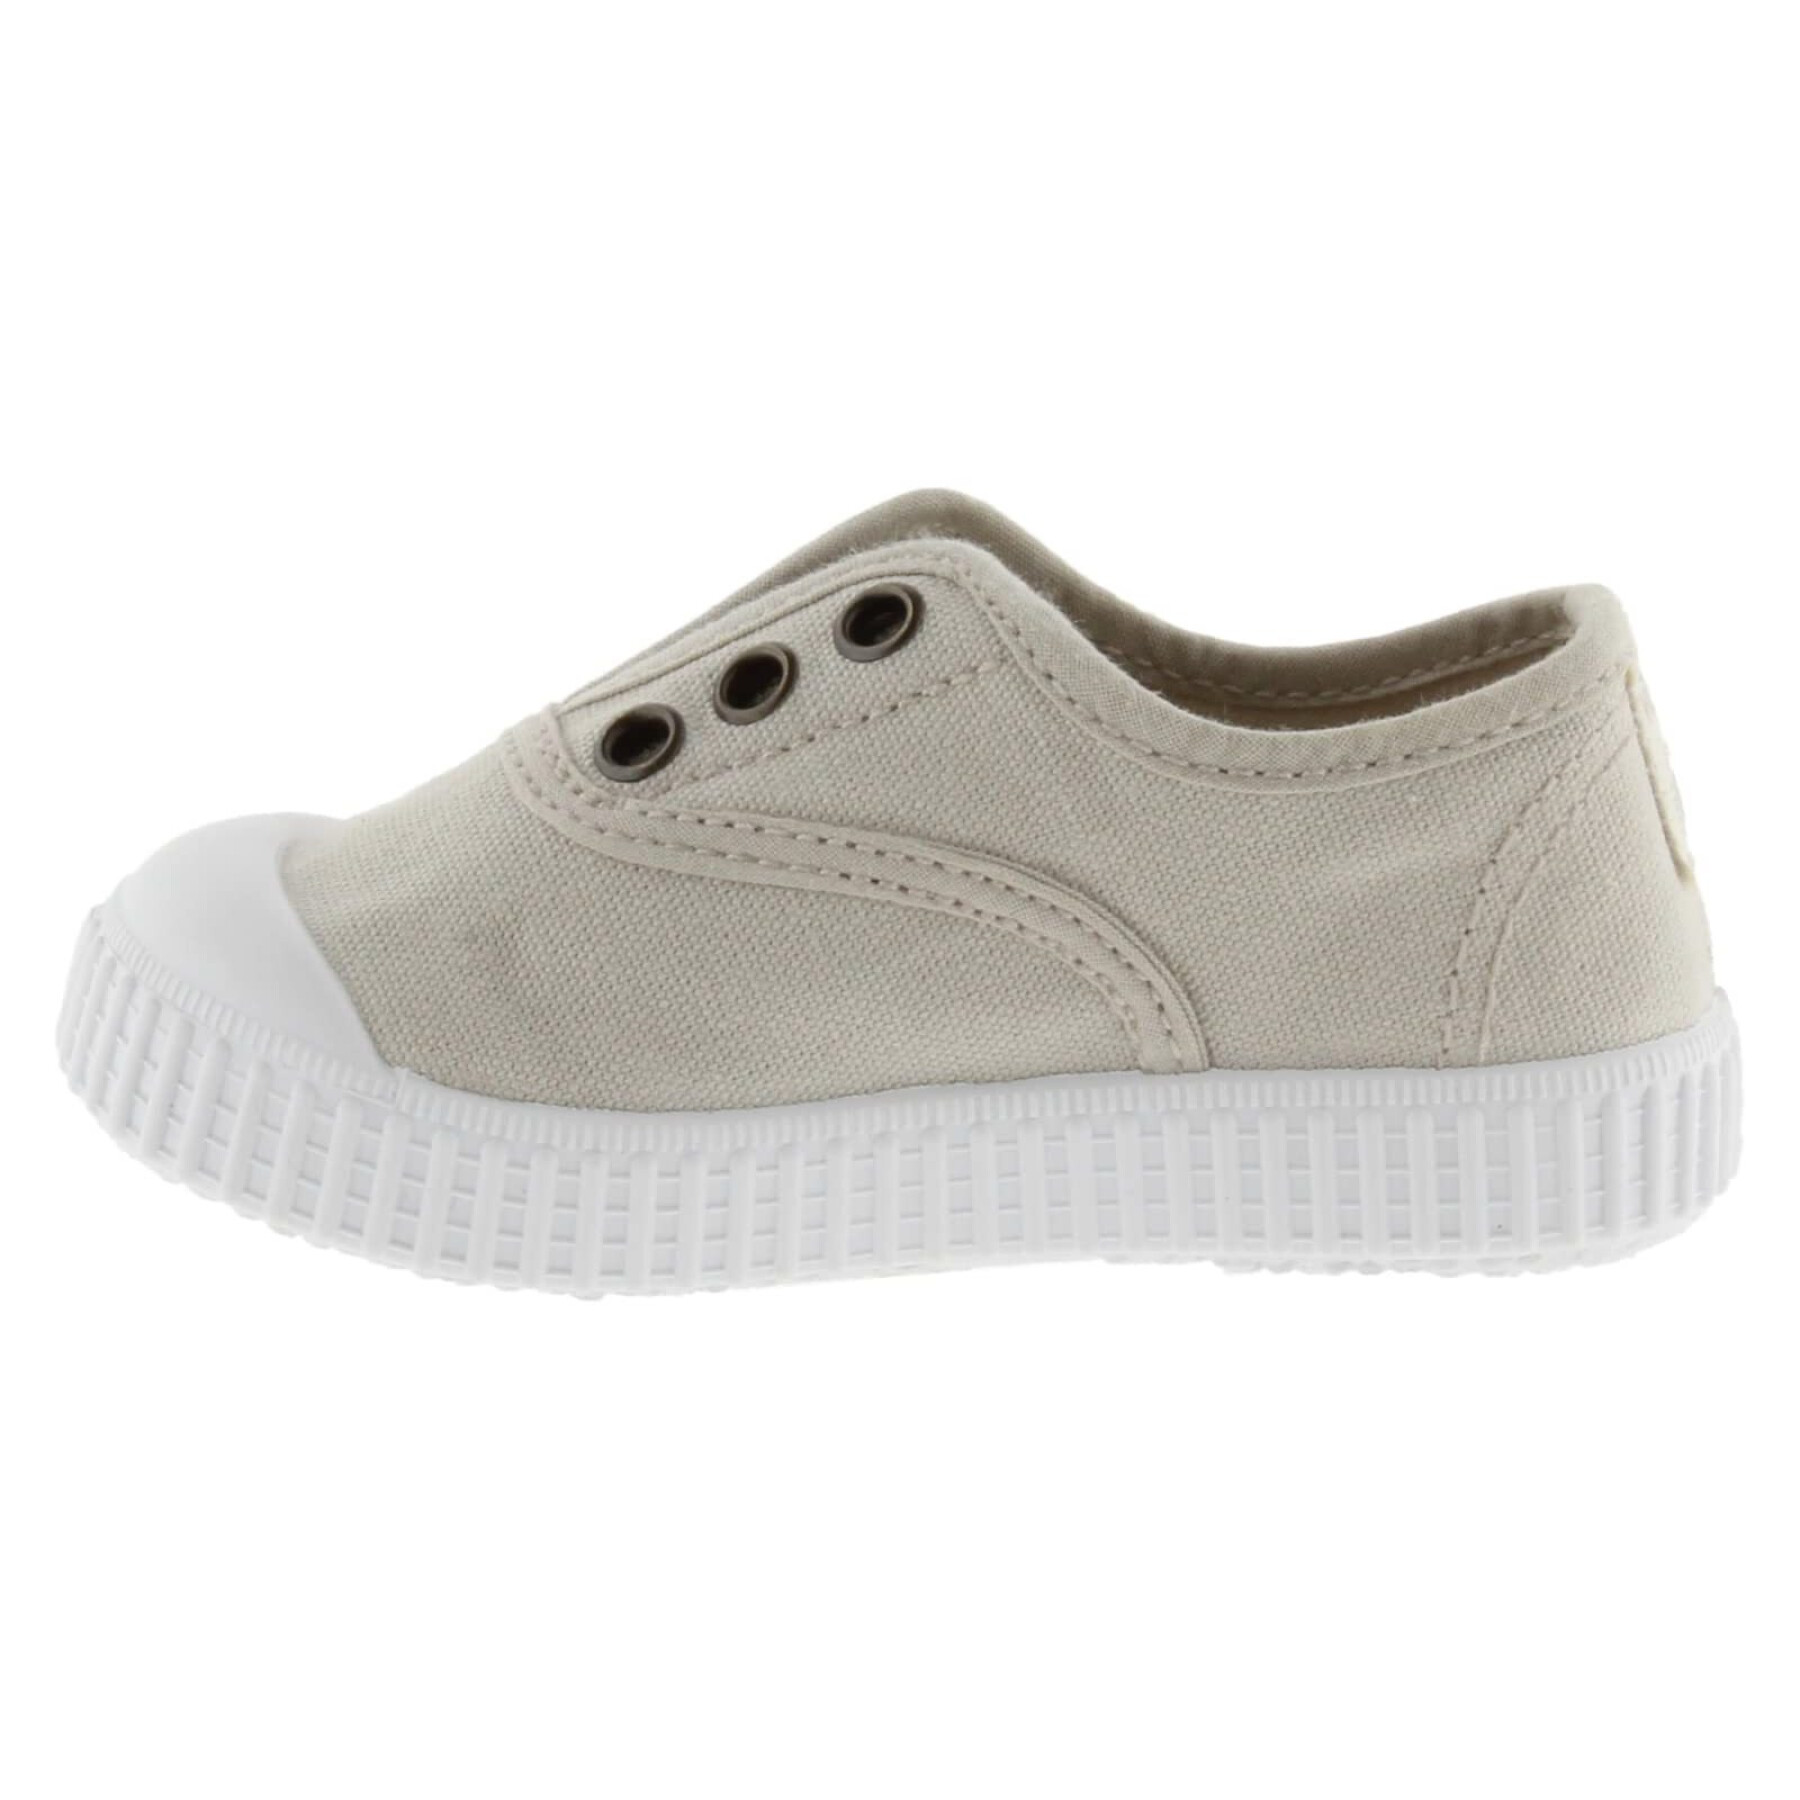 Washed canvas sneakers without laces girl Victoria 1915 Anglaise